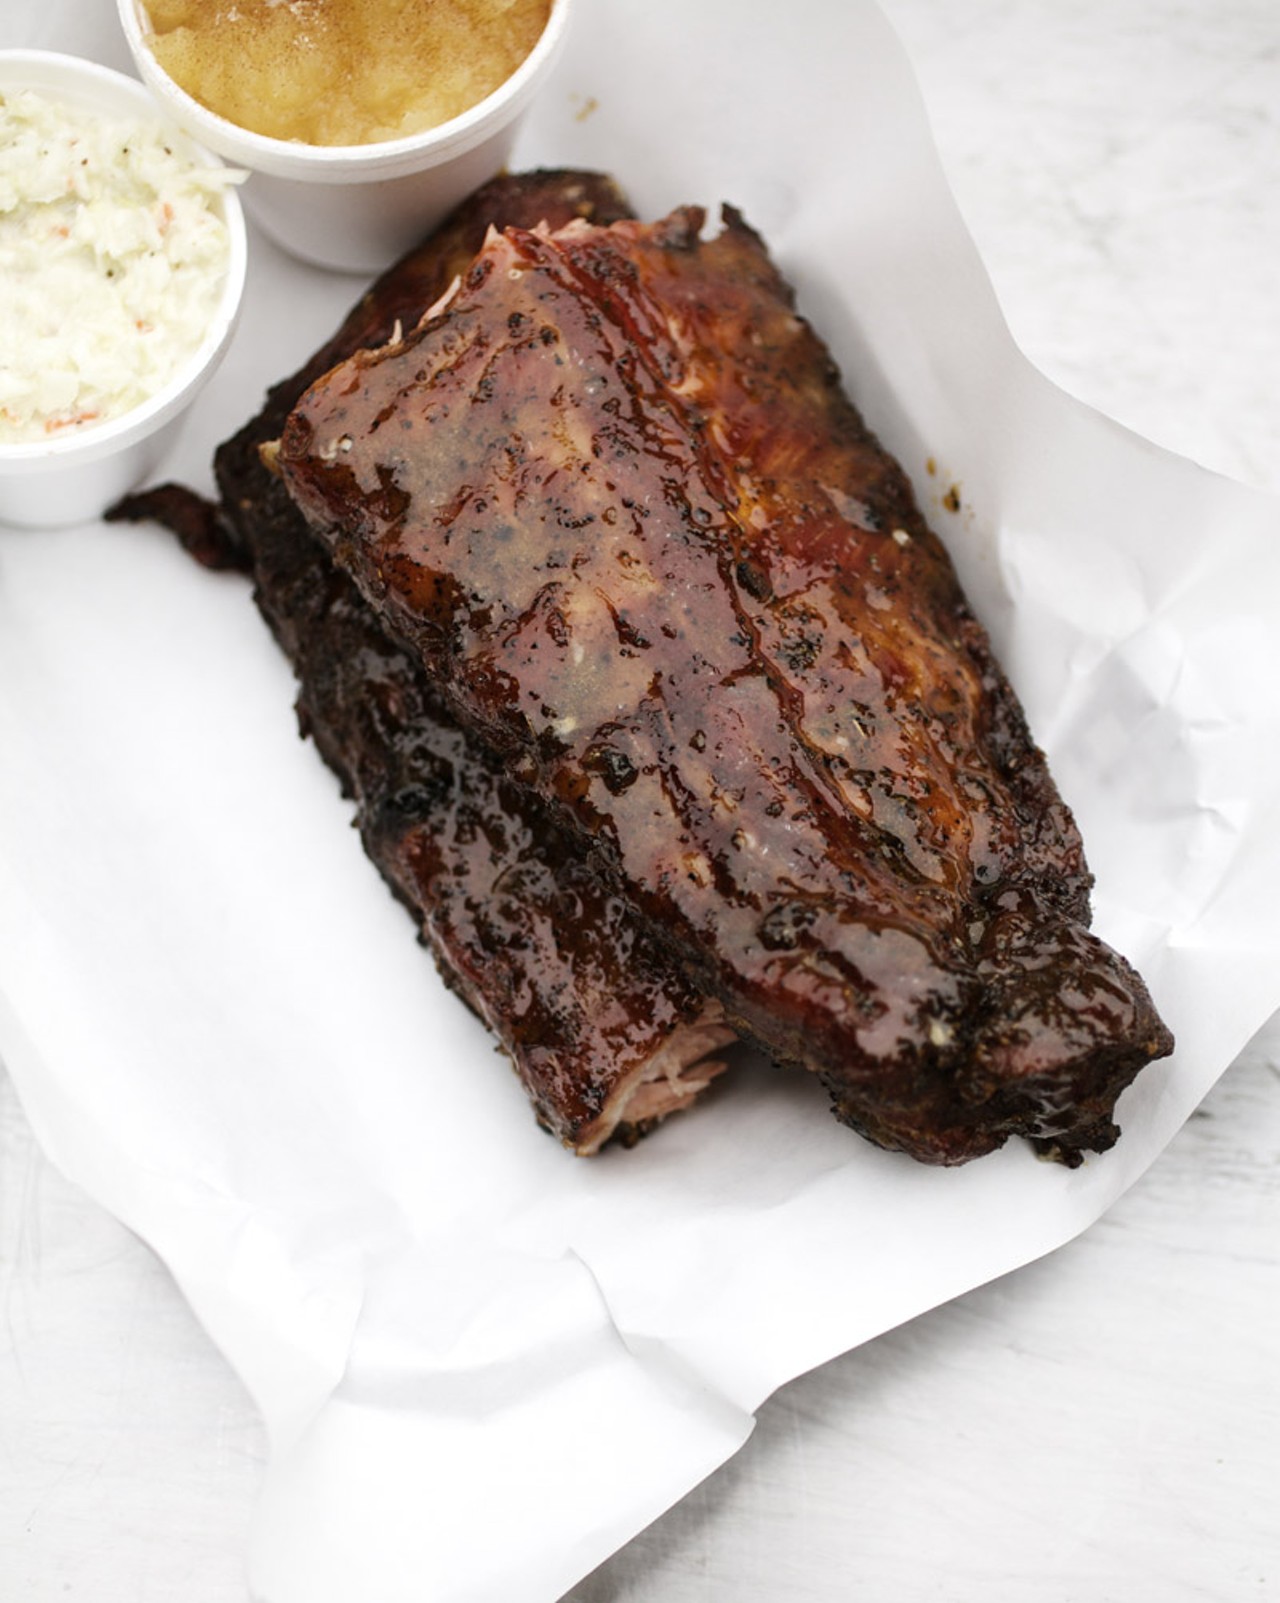 A Full Slab of Ribs with applesauce and slaw.